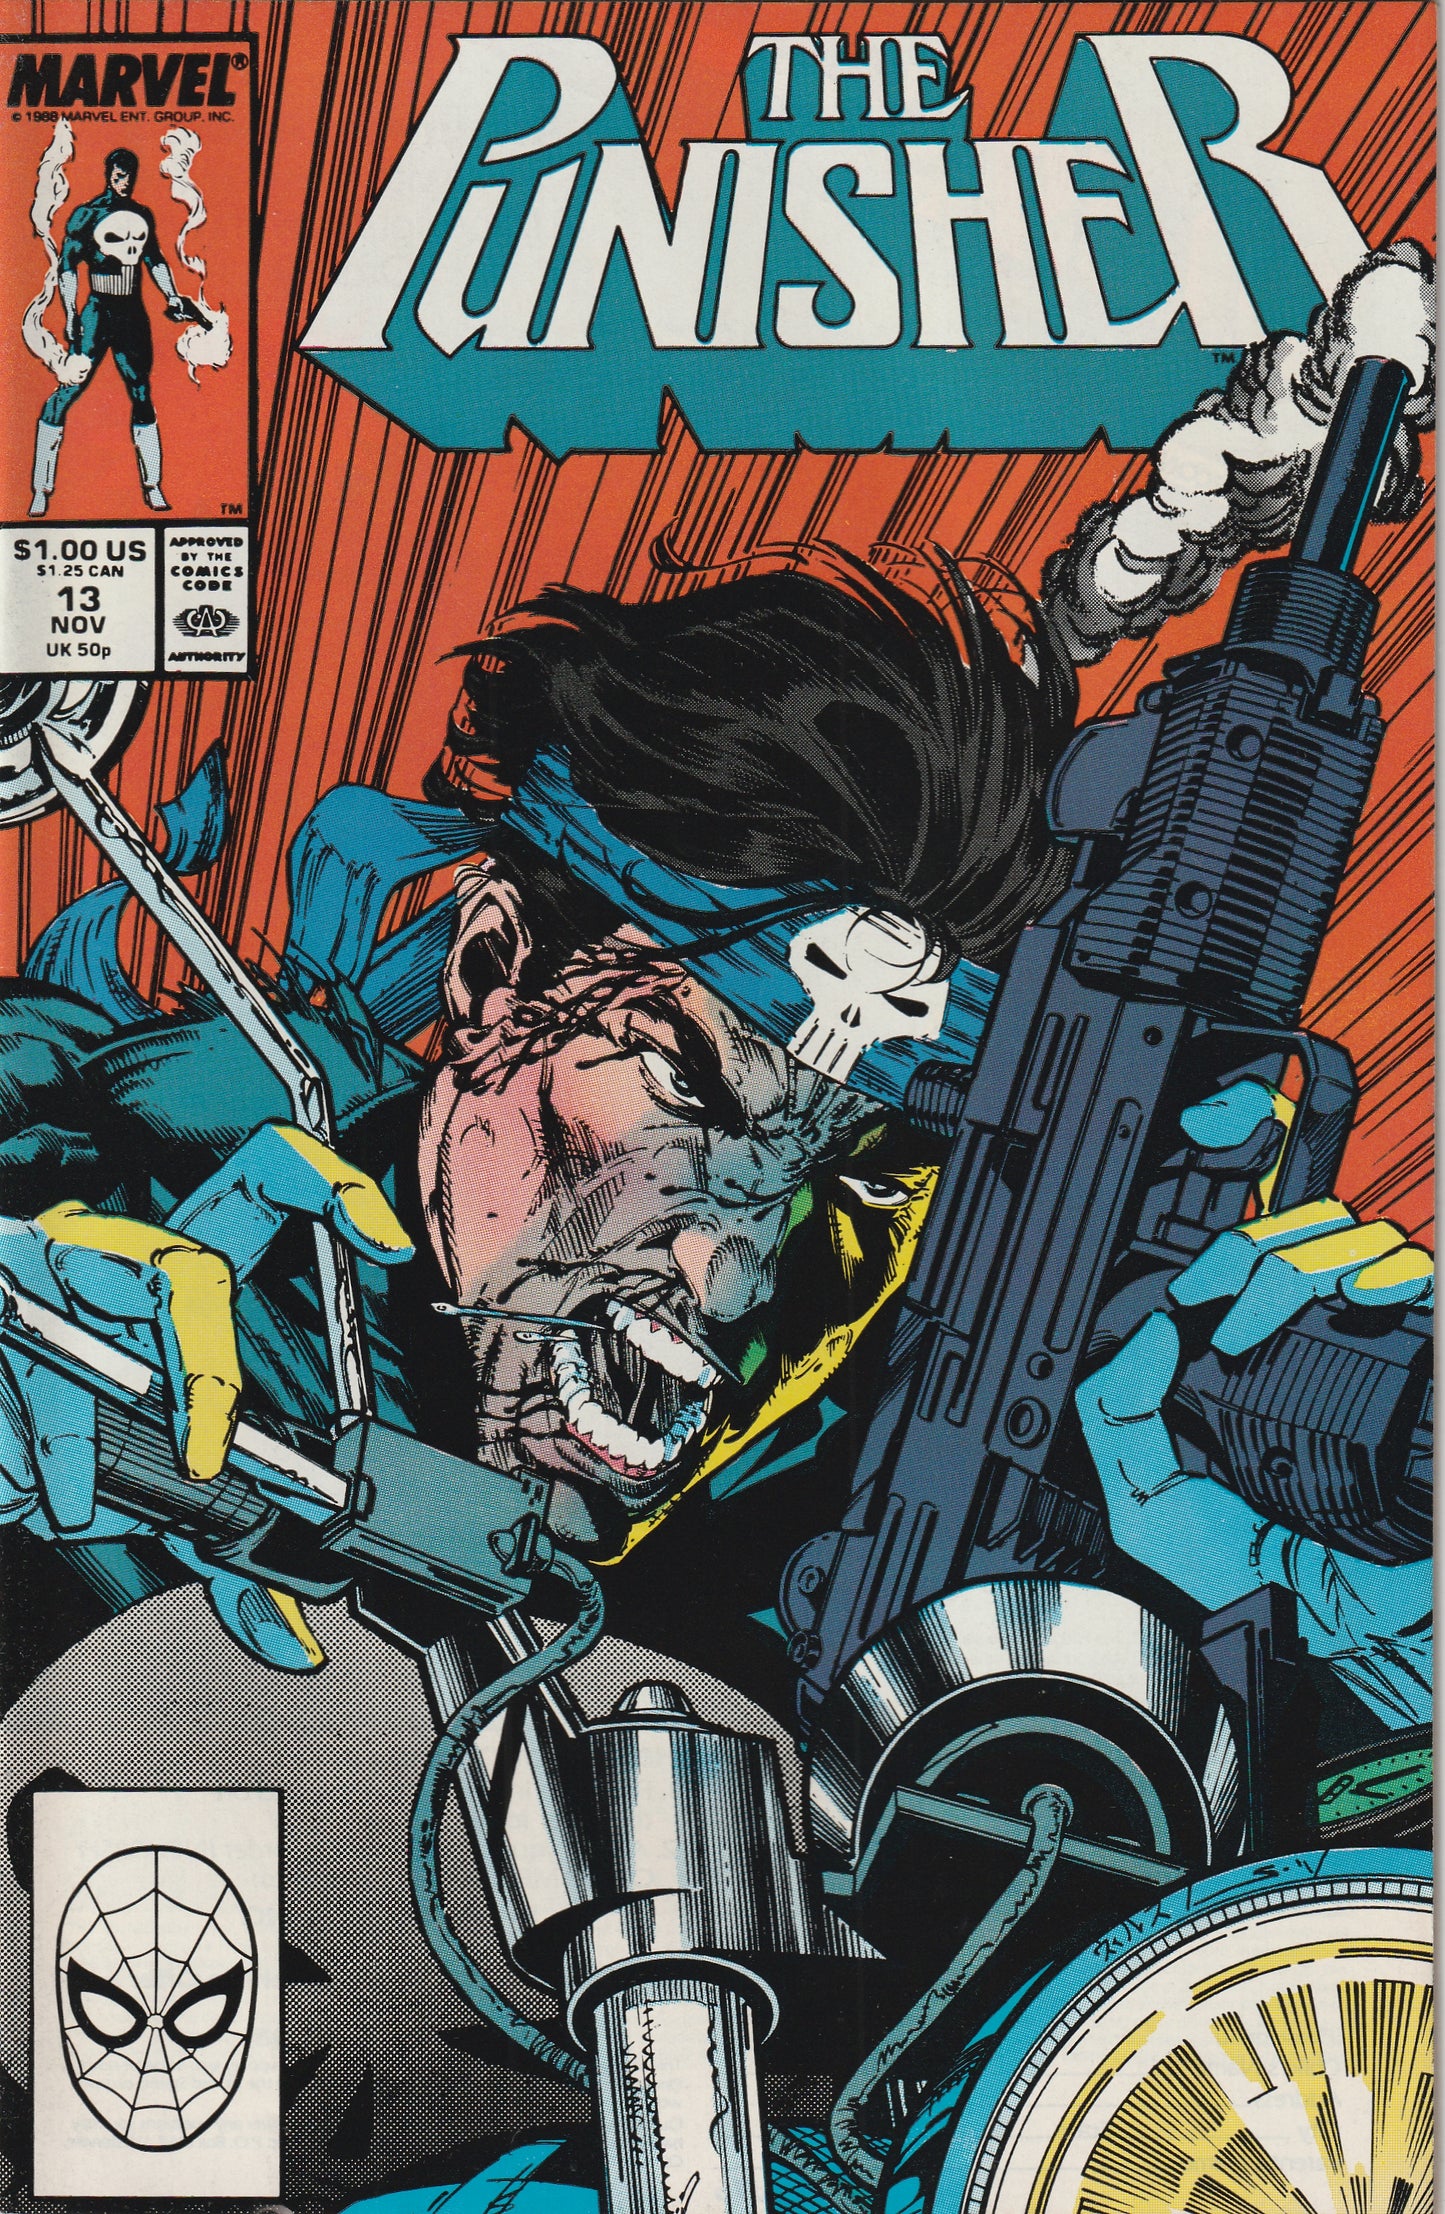 The Punisher #13 (1988)